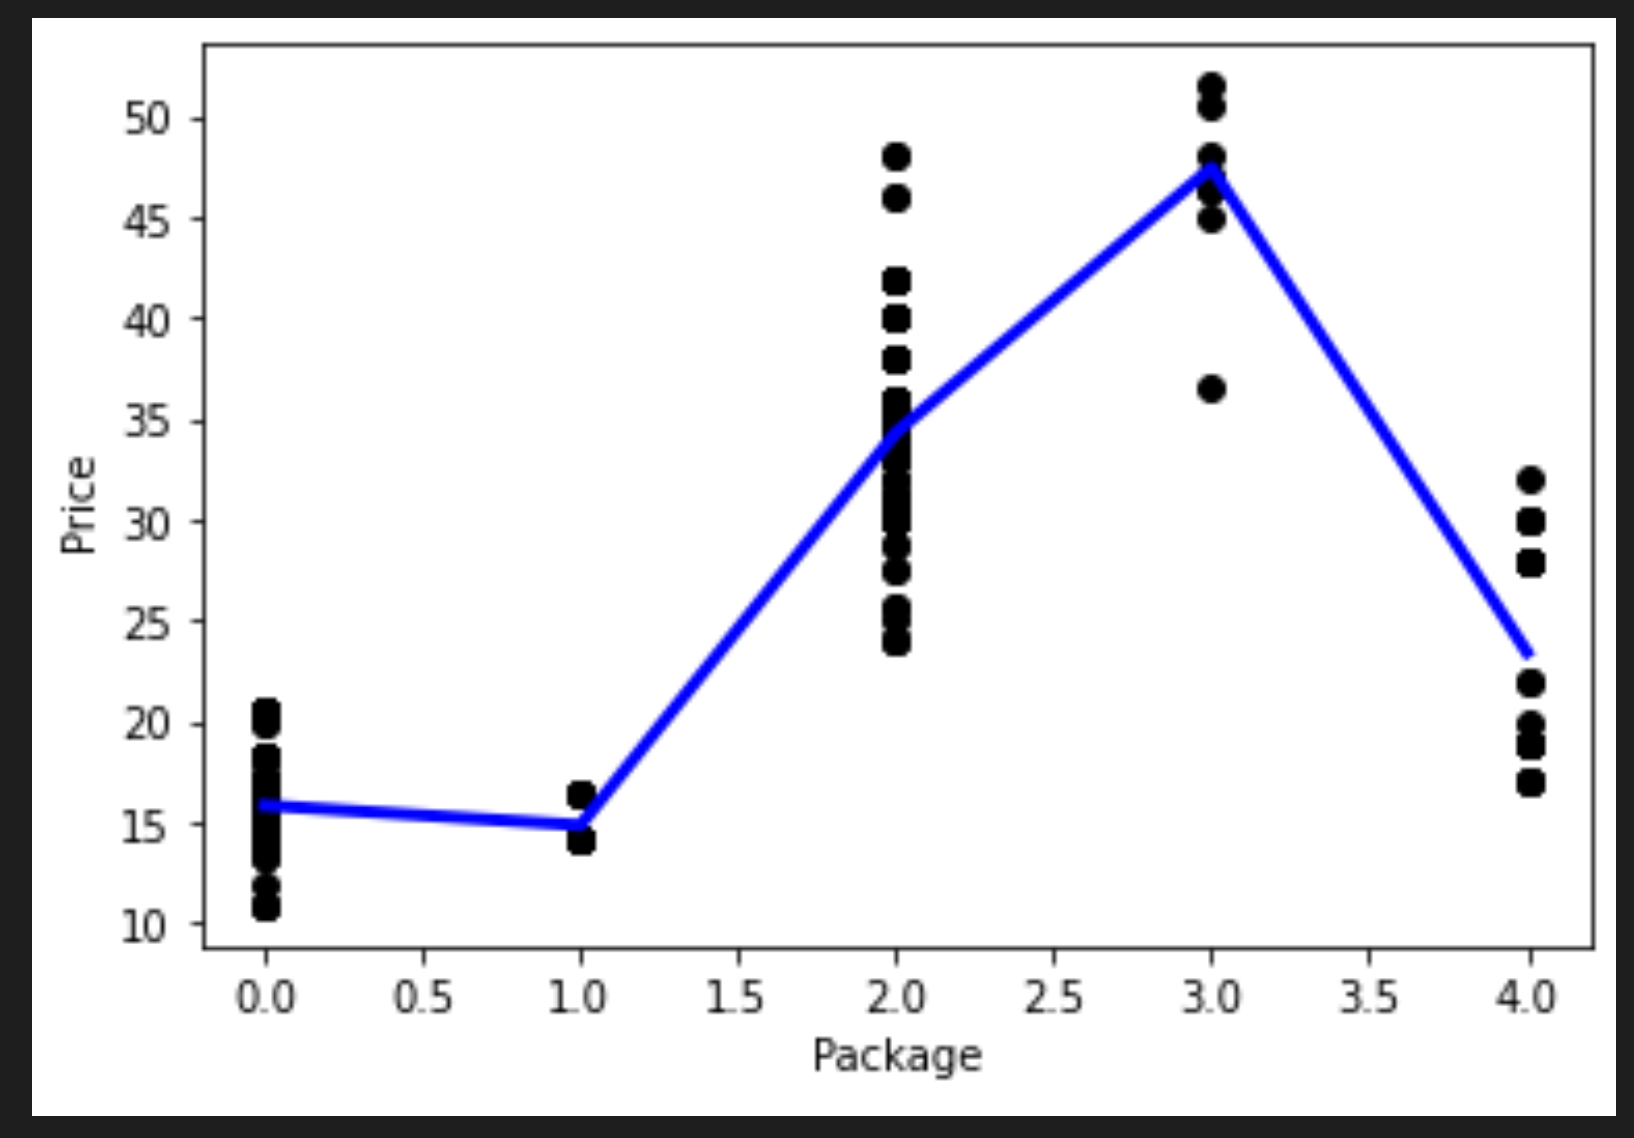 A polynomial plot showing package to price relationship